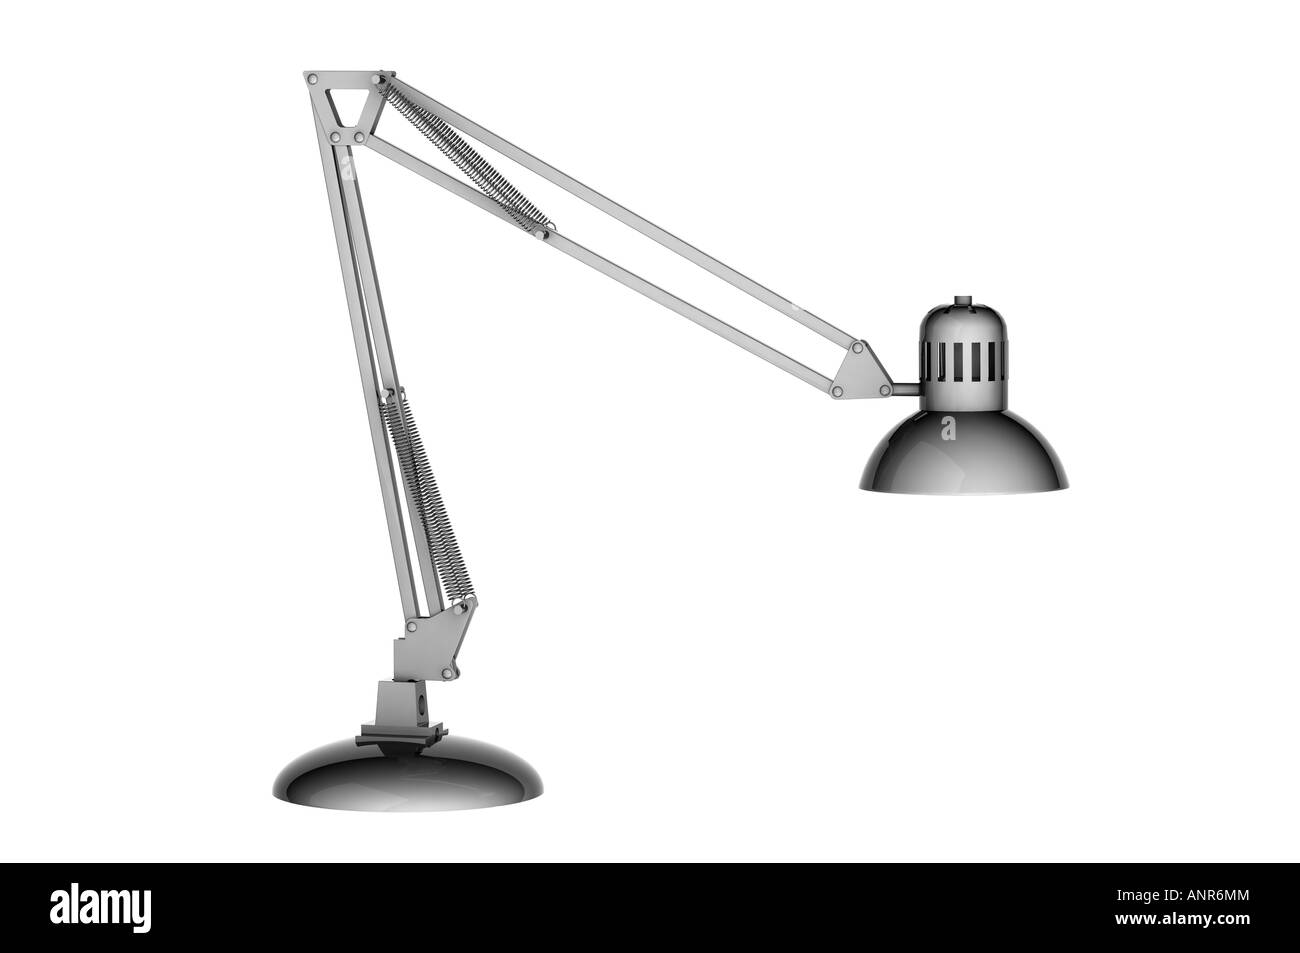 Anglepoise table lamp Stock Photo